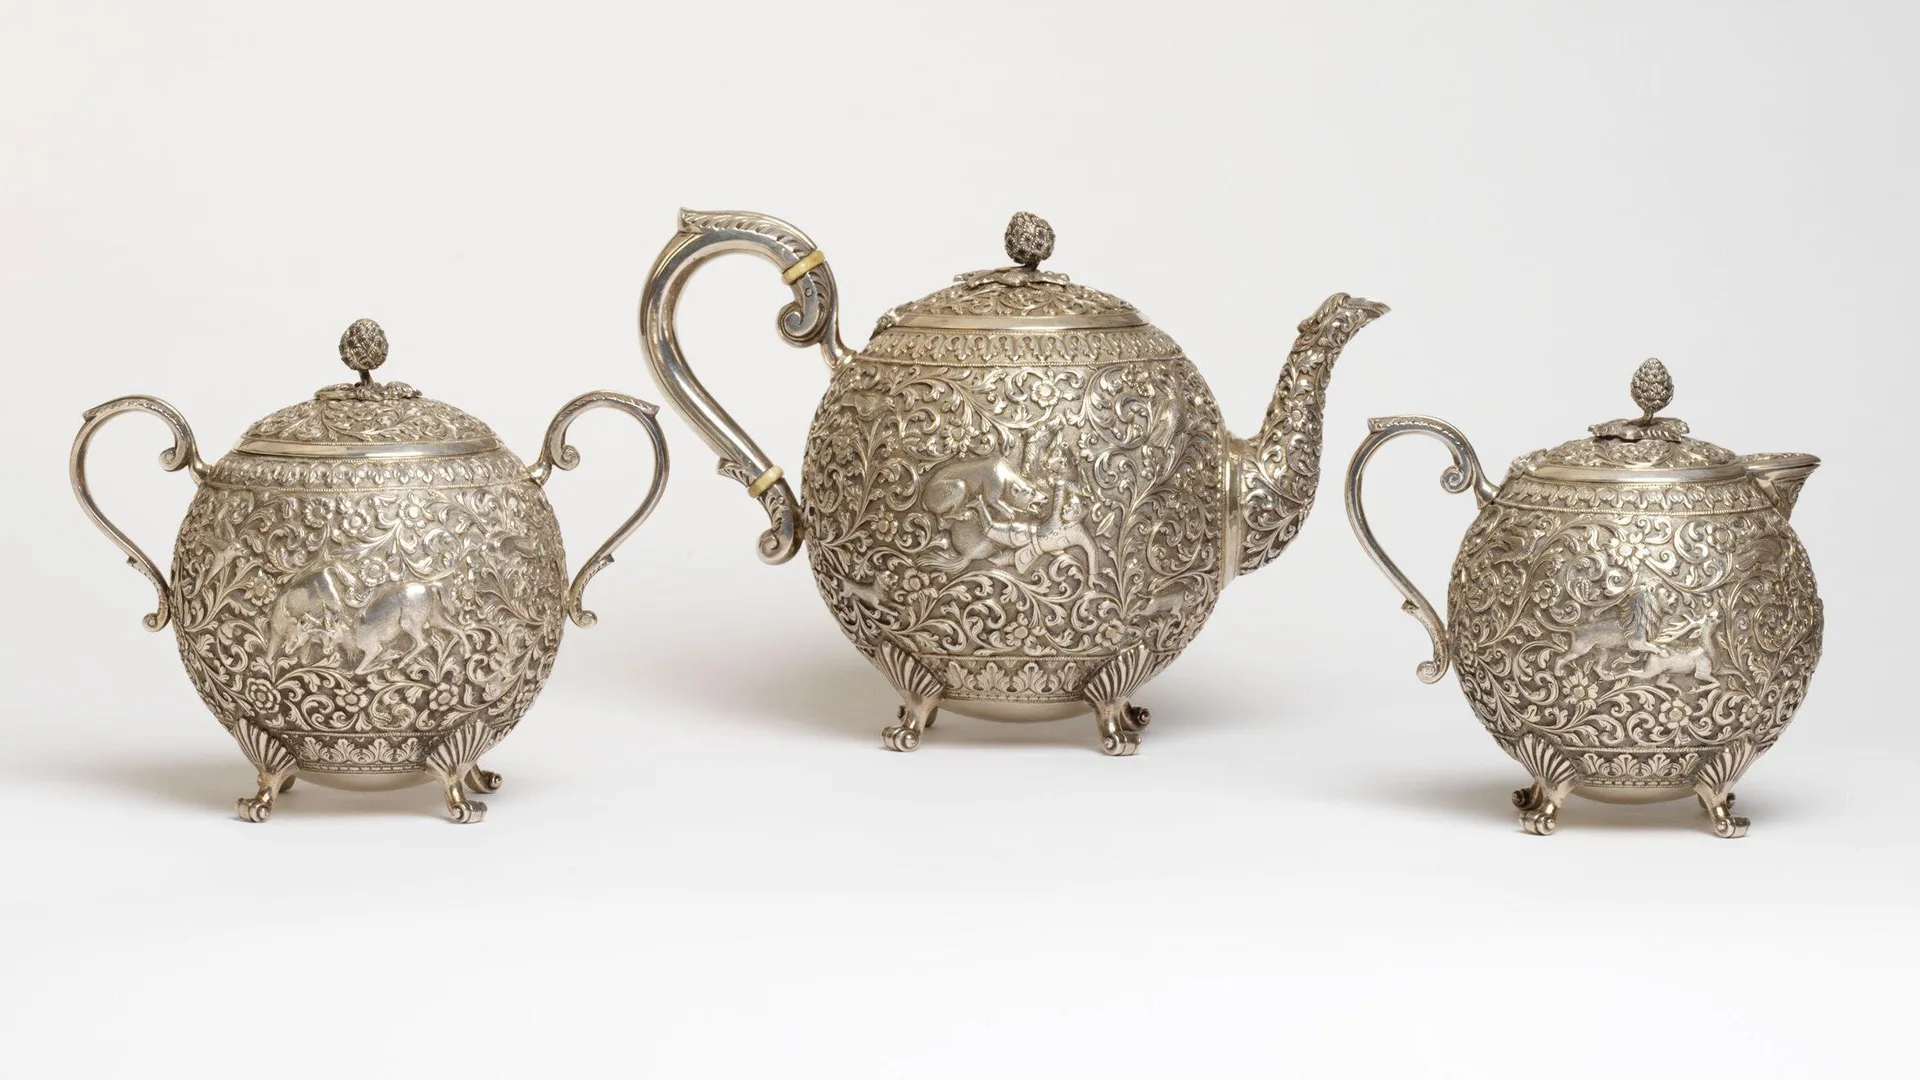 A photograph of a kutch silver teapot and sugar bowl set of three, against a white background